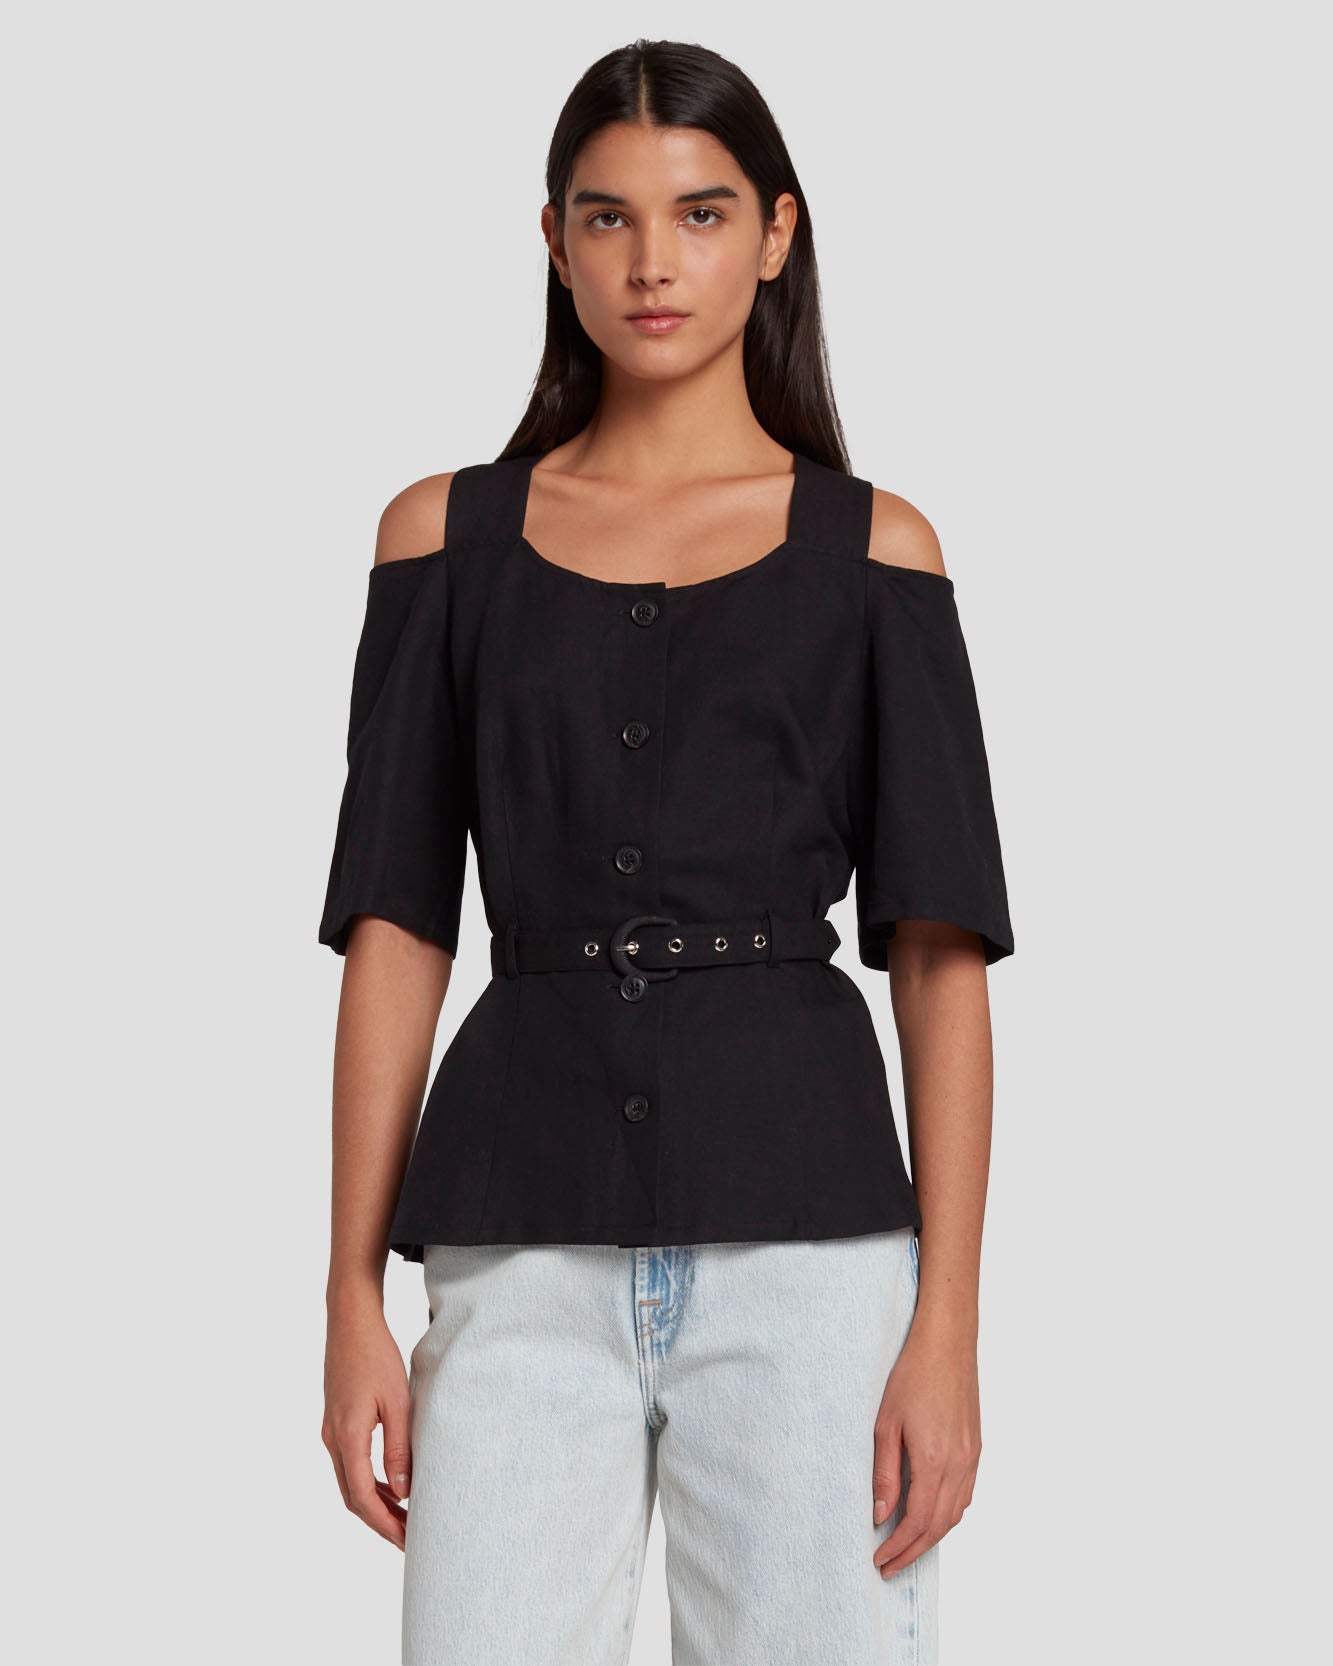 7 For All Mankind Tailored Off The Shoulder Top in Black 7N570F31BLK